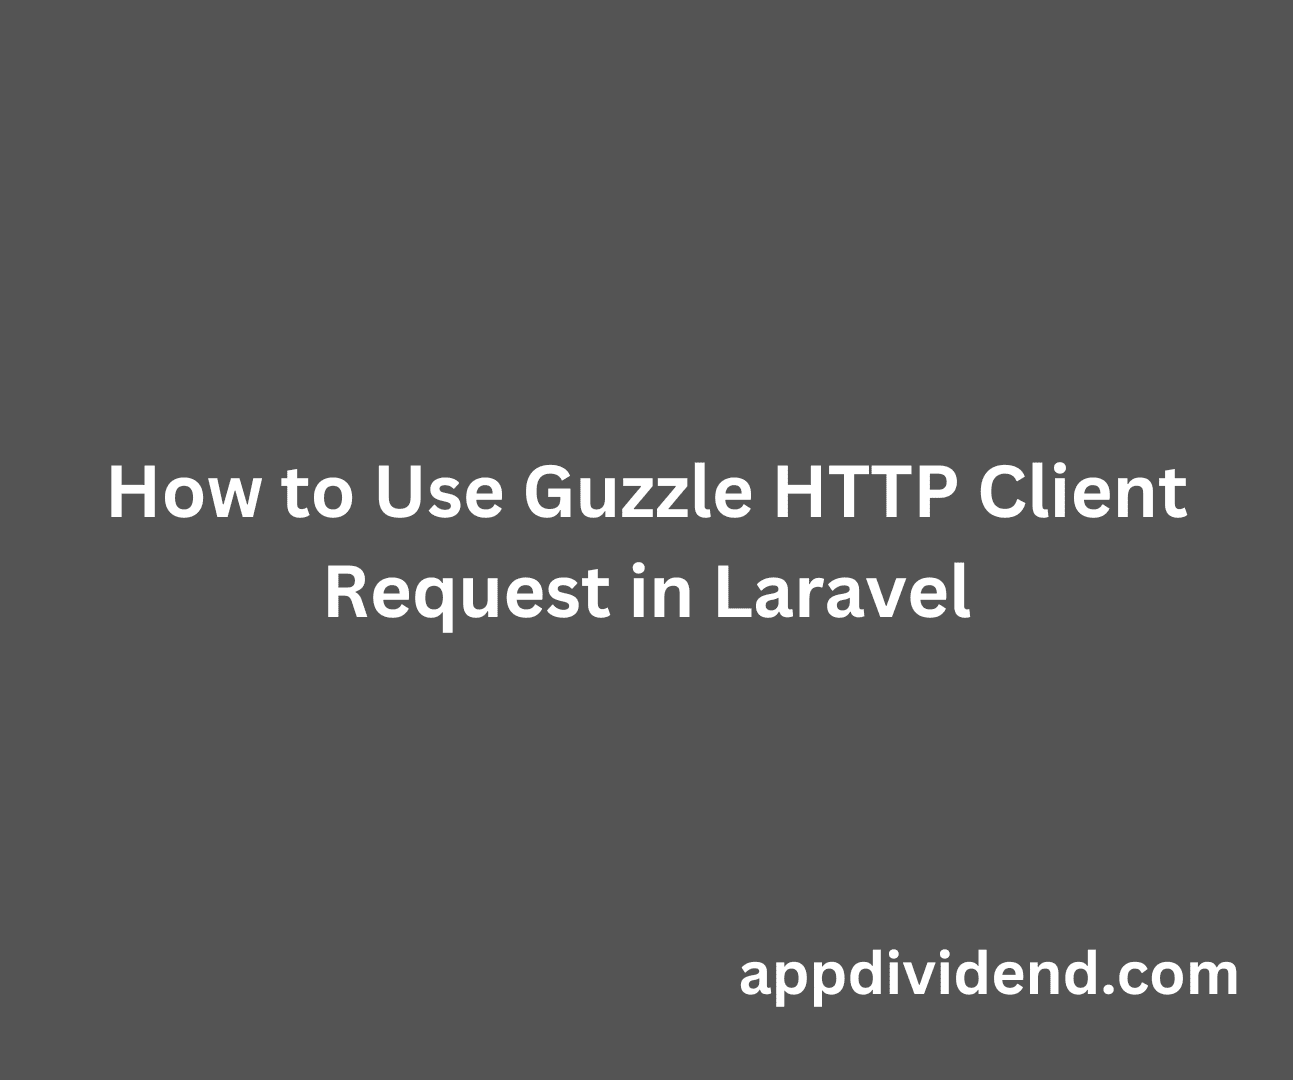 How to Use Guzzle HTTP Client Request in Laravel